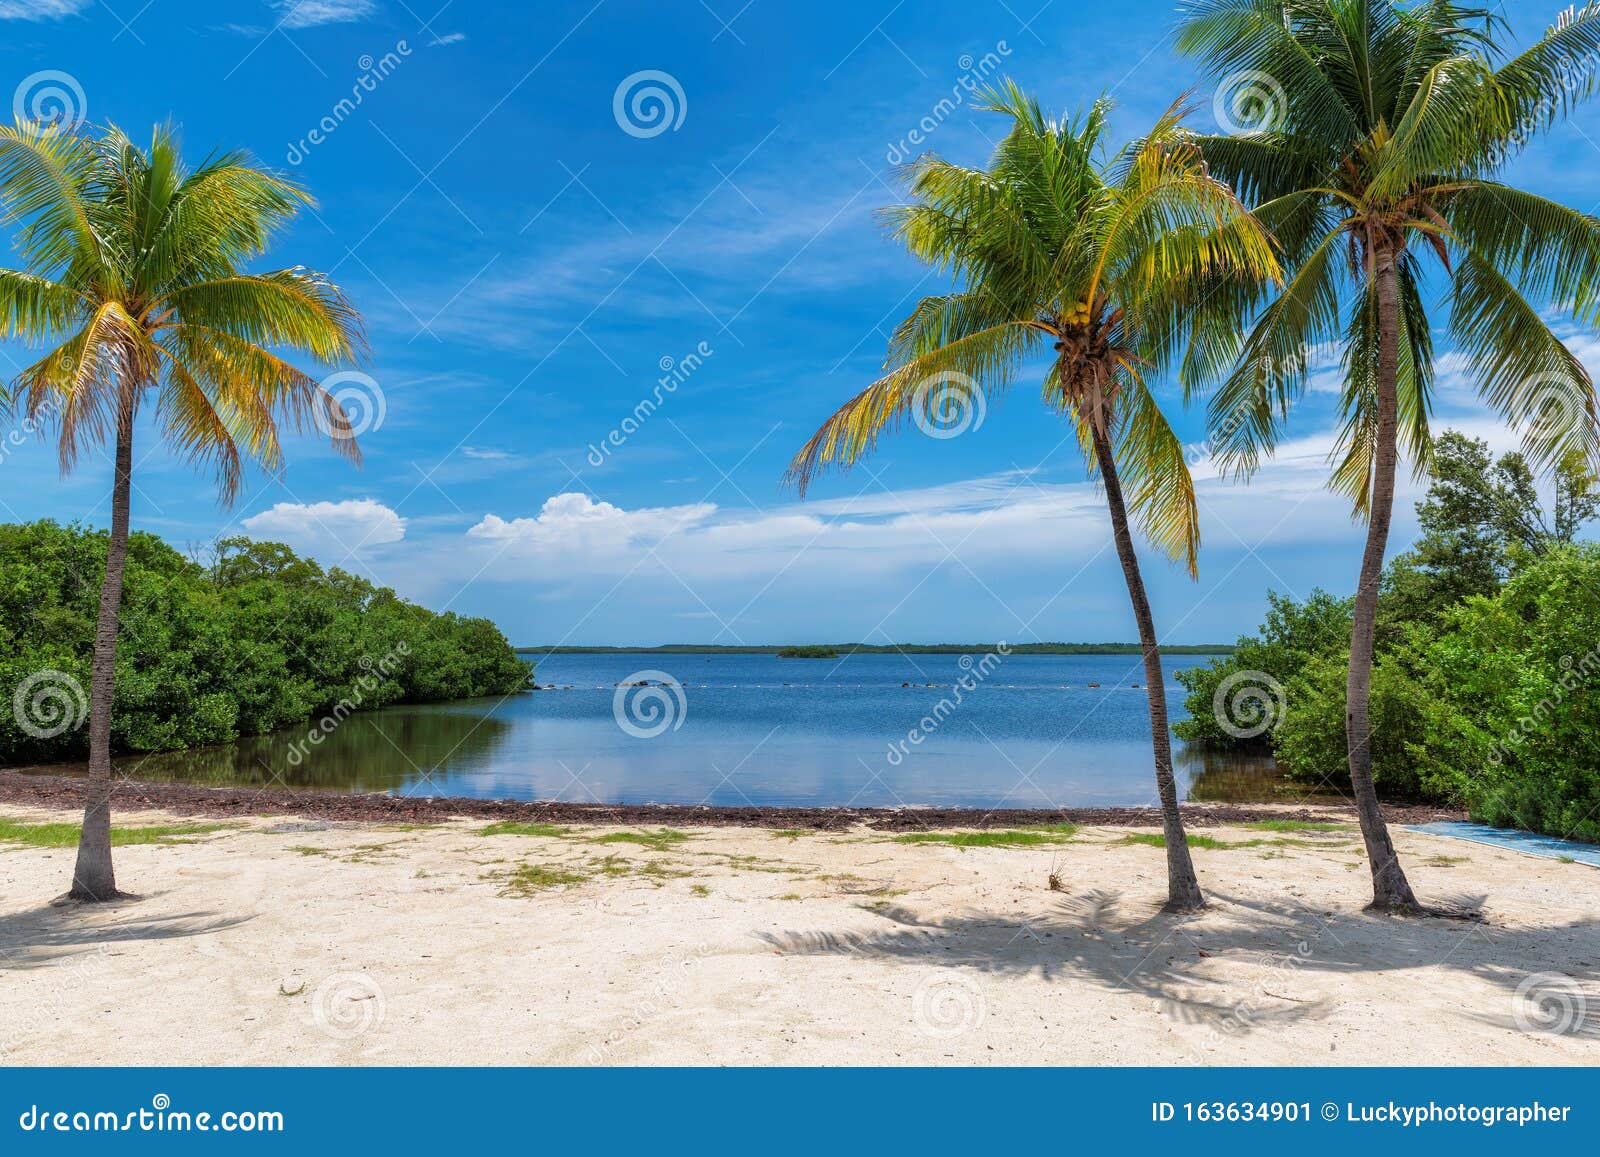 Coconut Palms on Sunny Beach and Caribbean Sea Stock Image - Image of ...